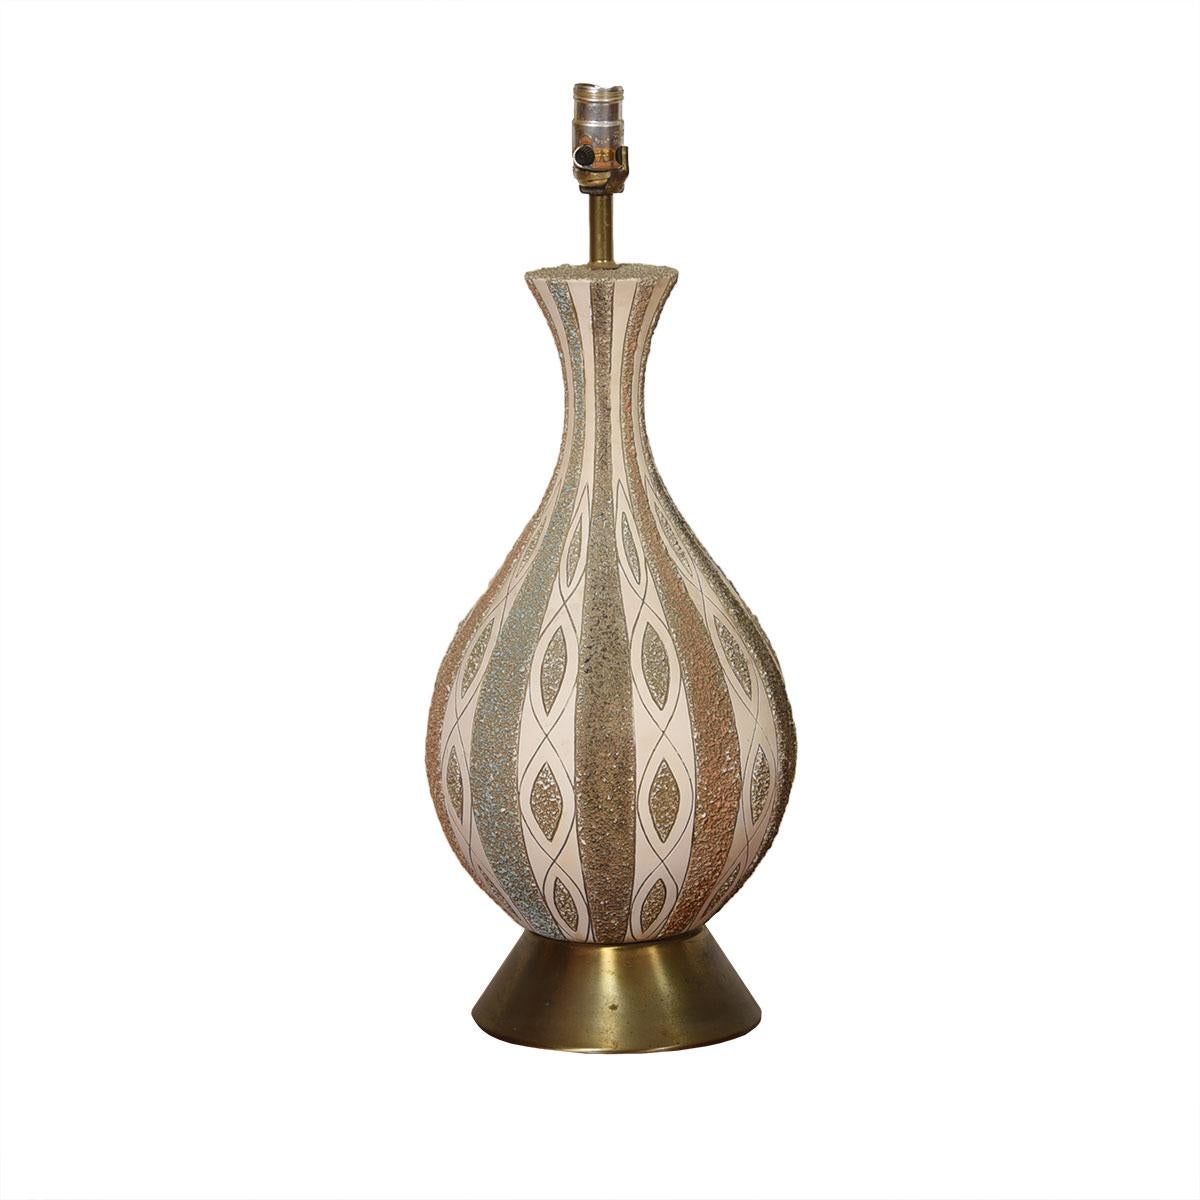 MCM Lamp with Incised Decoration

Additional information:
Dimension: Ø 11 x H 25.5.